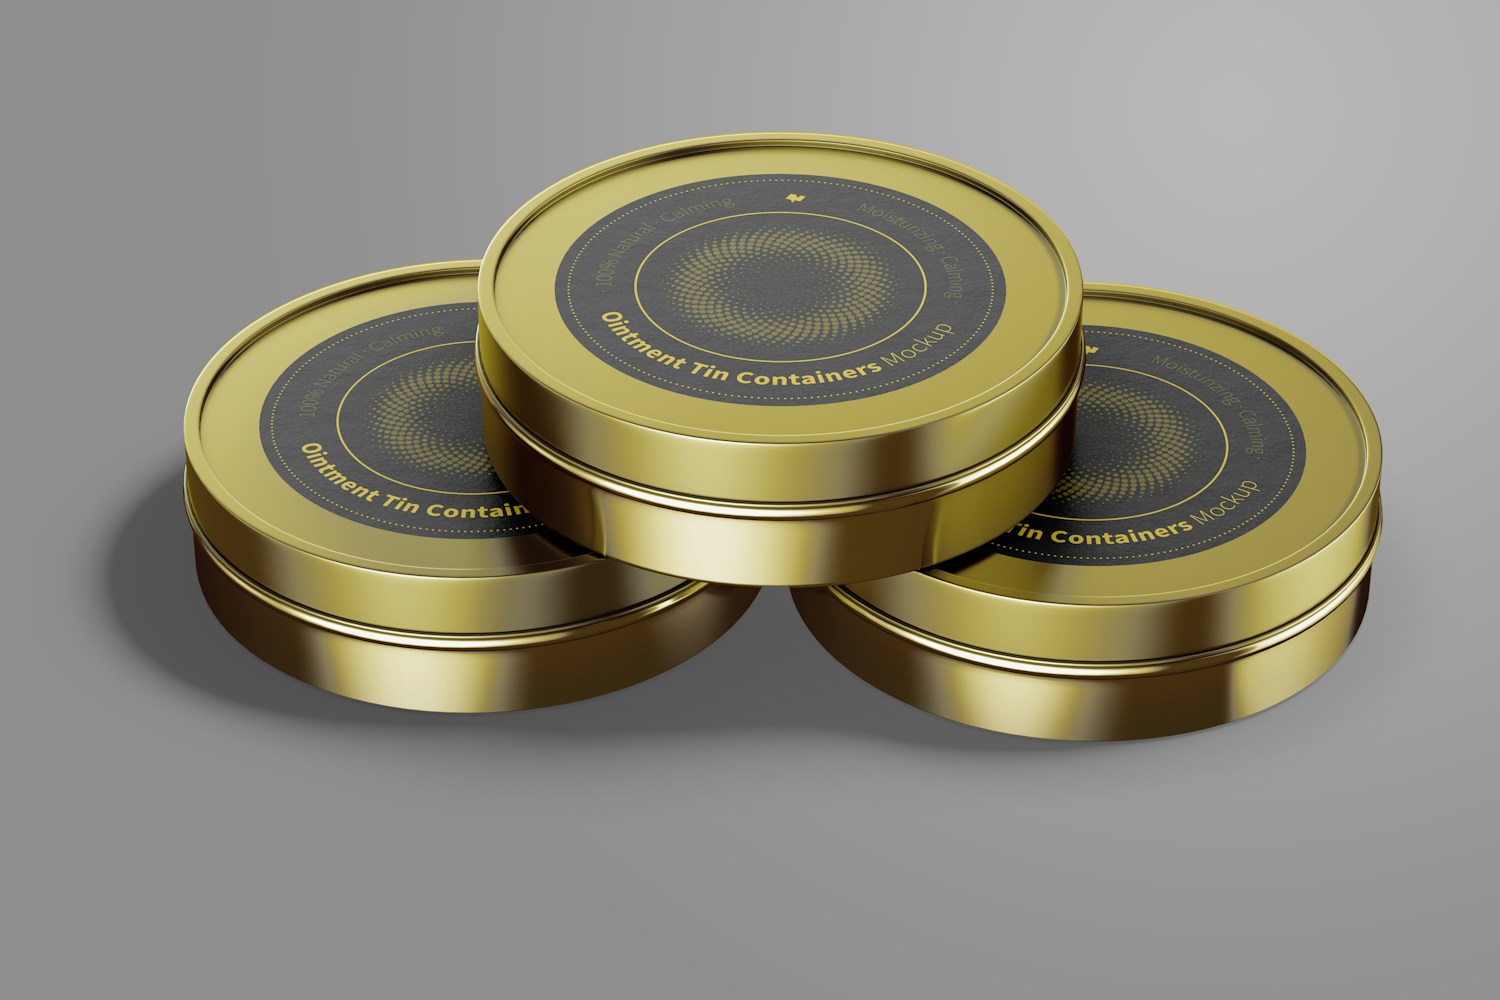 Ointment Tin Containers Mockup, Stacked